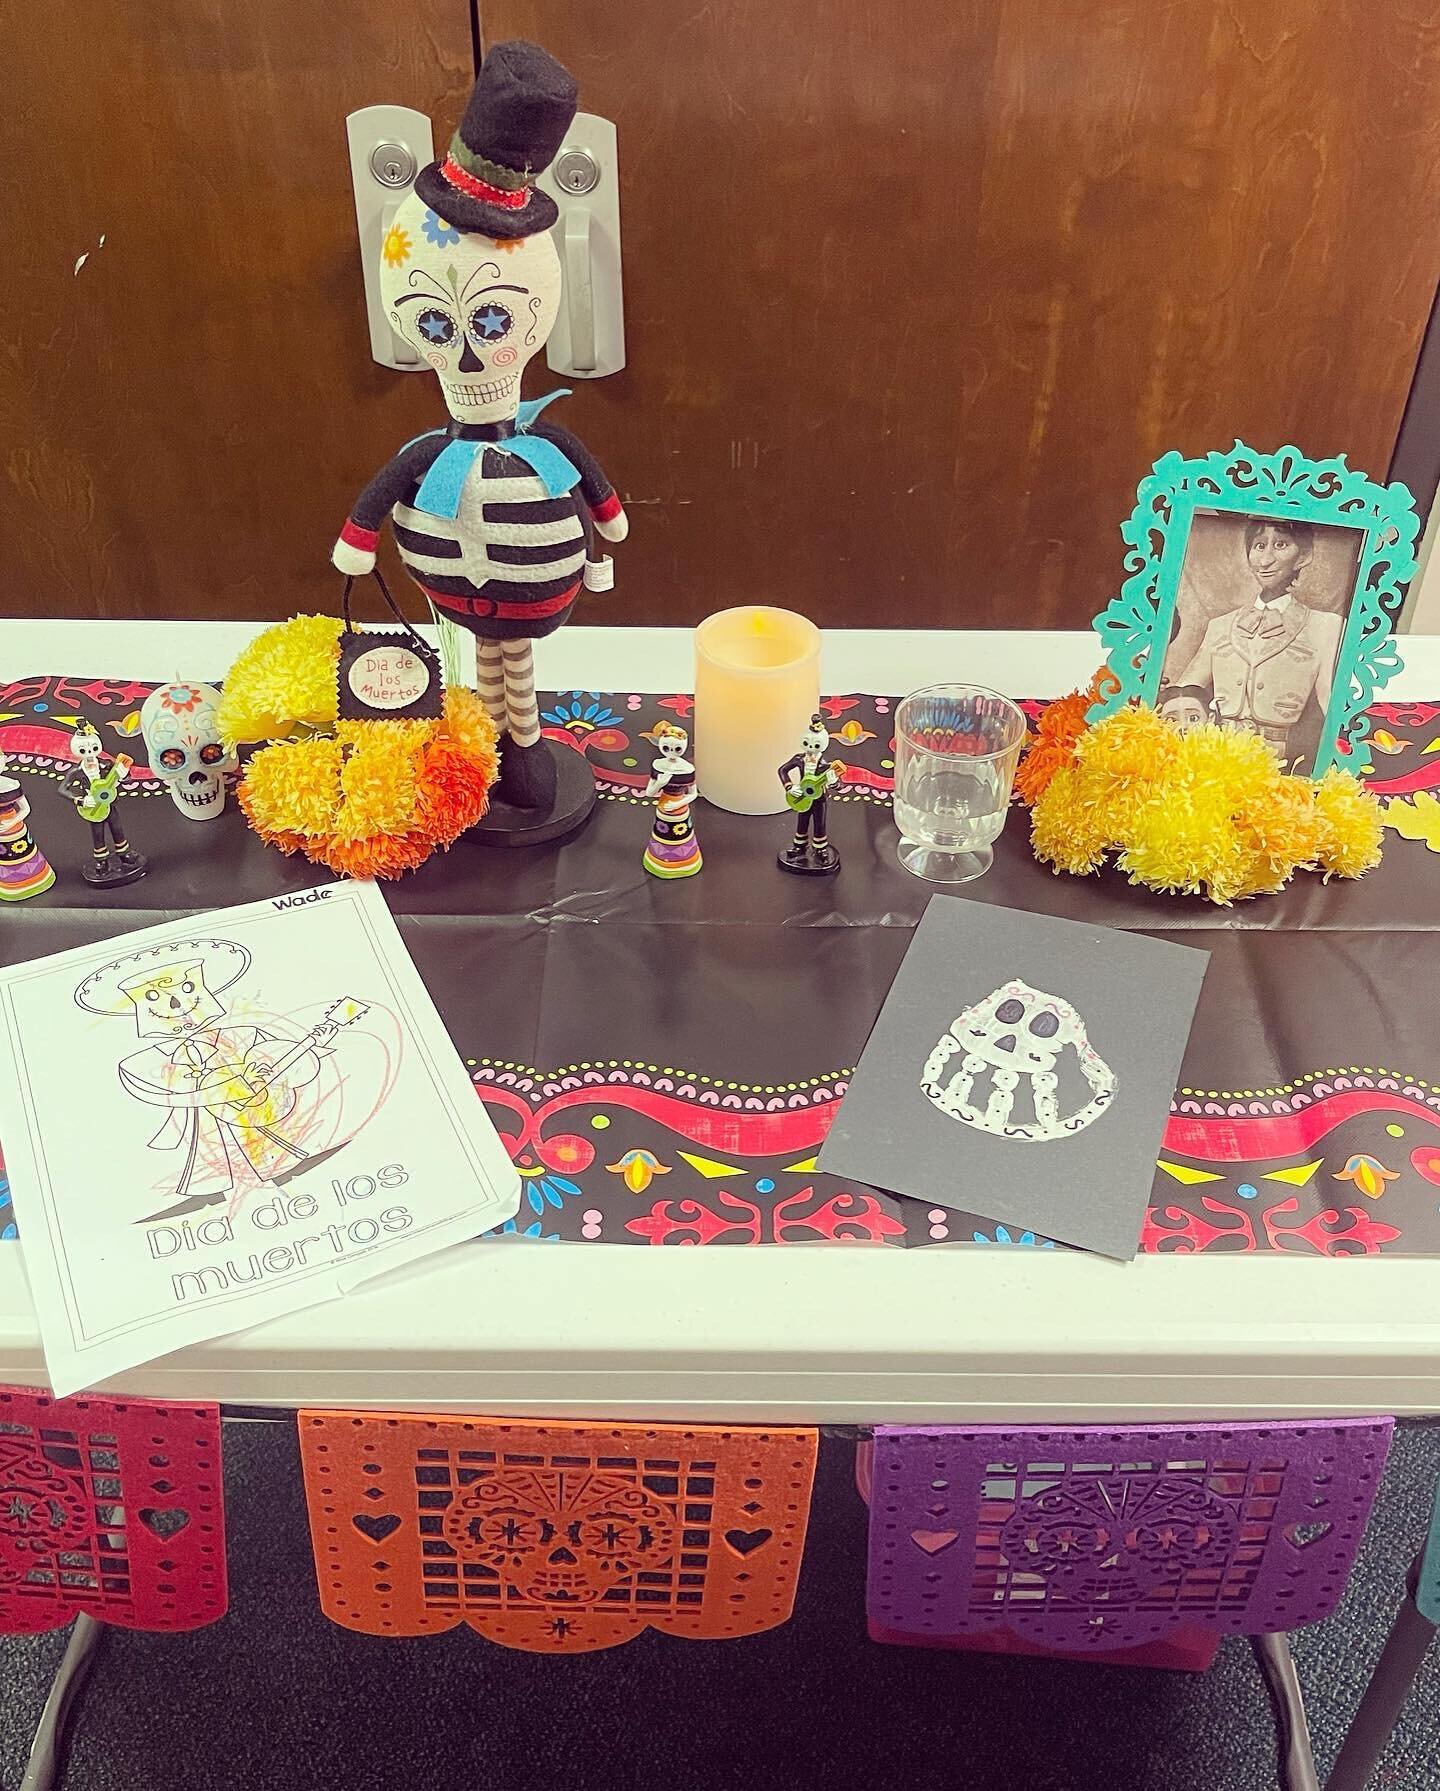 ✨Feliz Dia de los Muertos ✨
You are in our thoughts everyday but today, we loudly celebrate your lives, your laughs and your love. 

Our students built a small version of an ofrenda and also enjoyed a larger, beautiful ofrenda by our friends @mosaic_